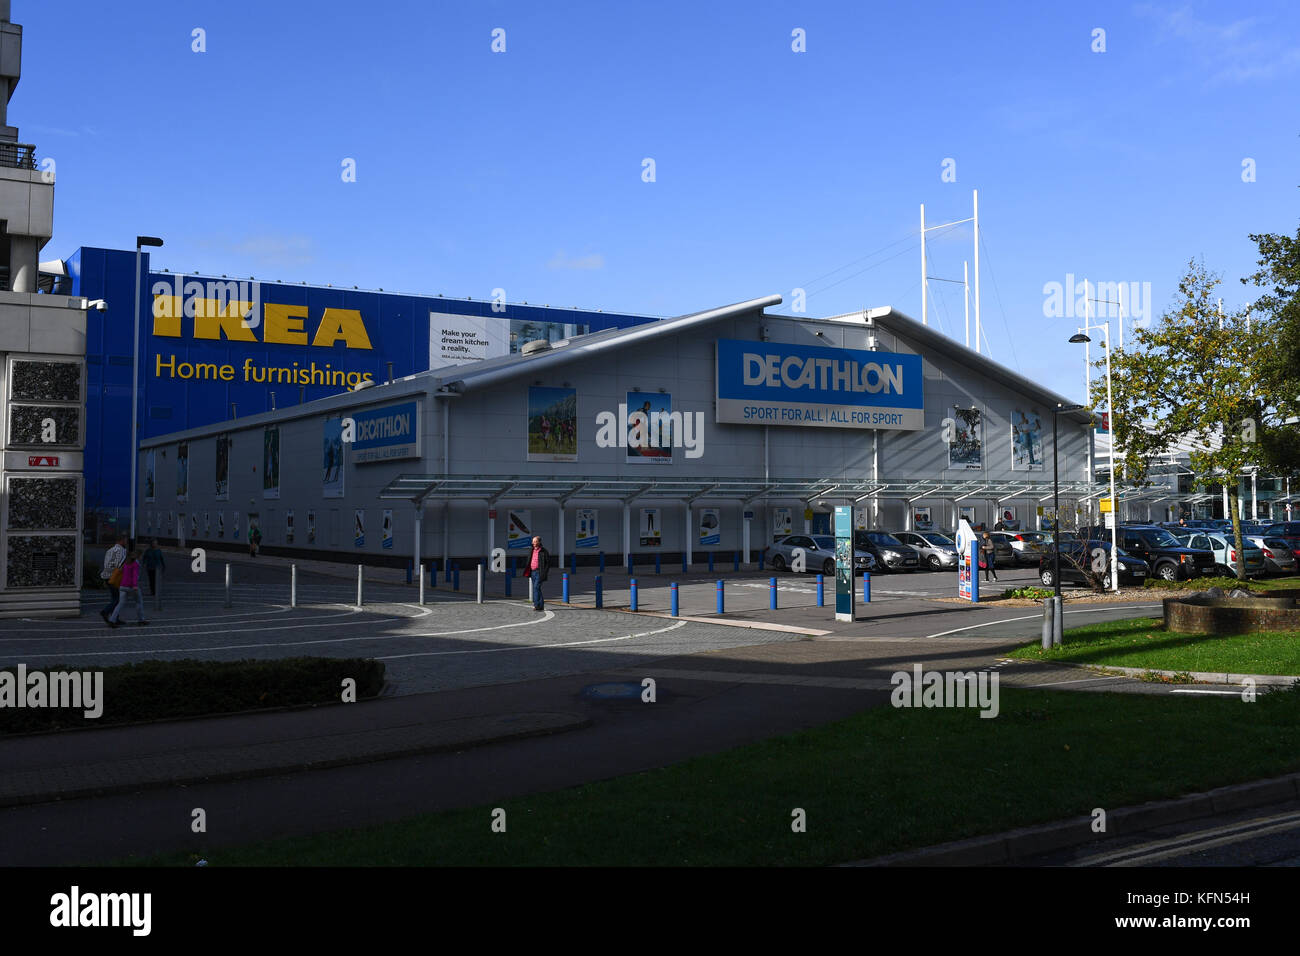 Decathlon and Ikea shops in Southampton Westquay shopping area Stock Photo  - Alamy